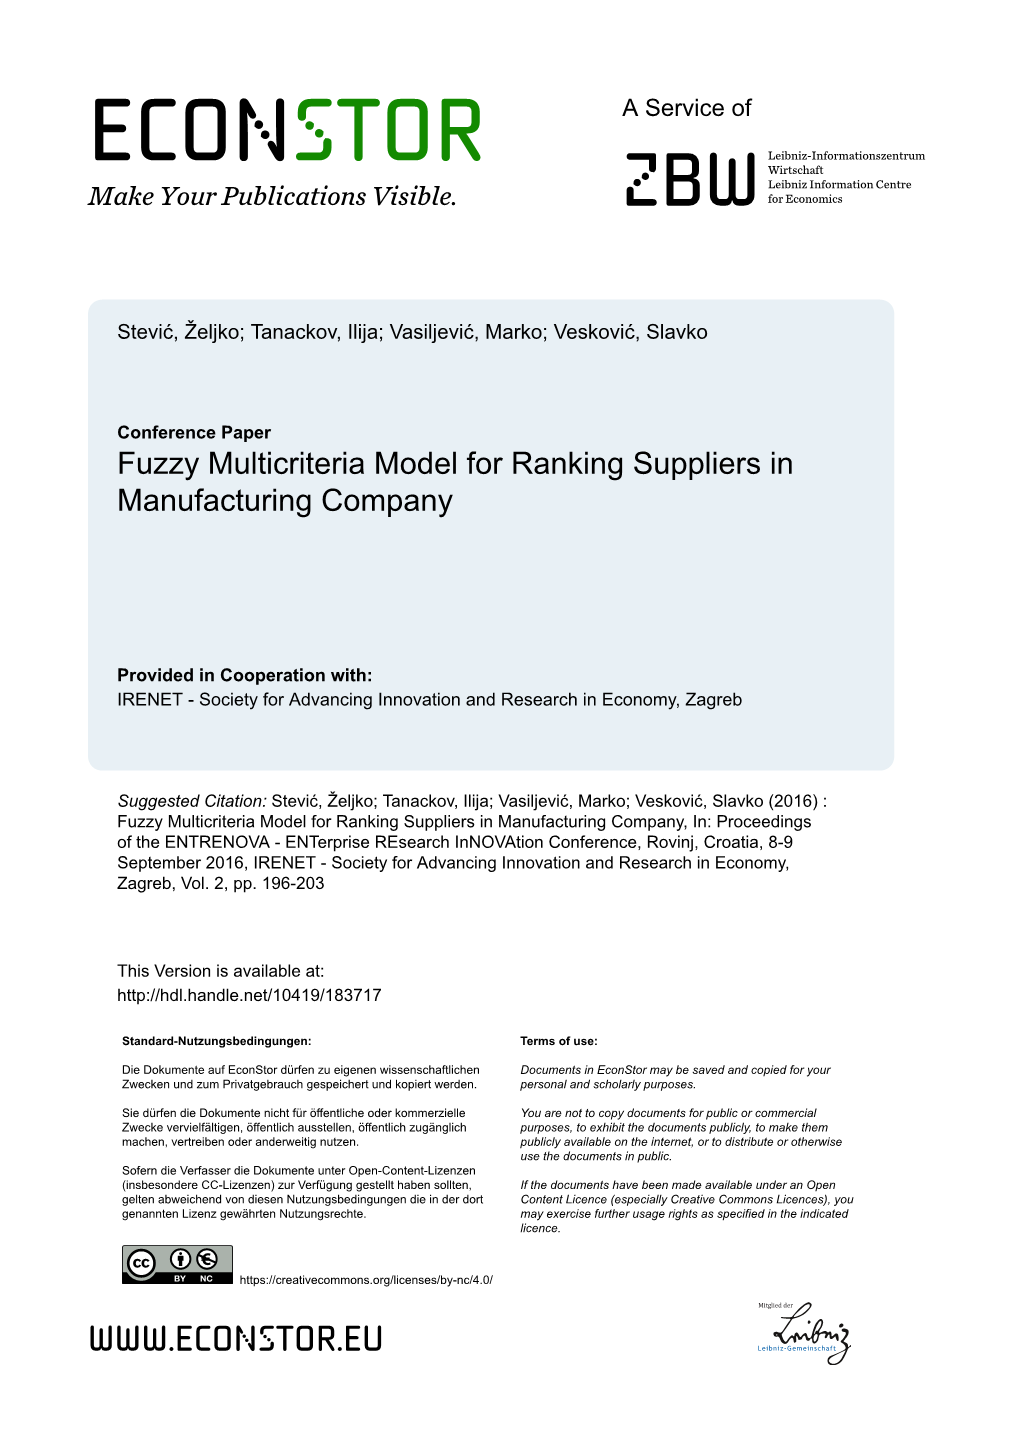 Fuzzy Multicriteria Model for Ranking Suppliers in Manufacturing Company